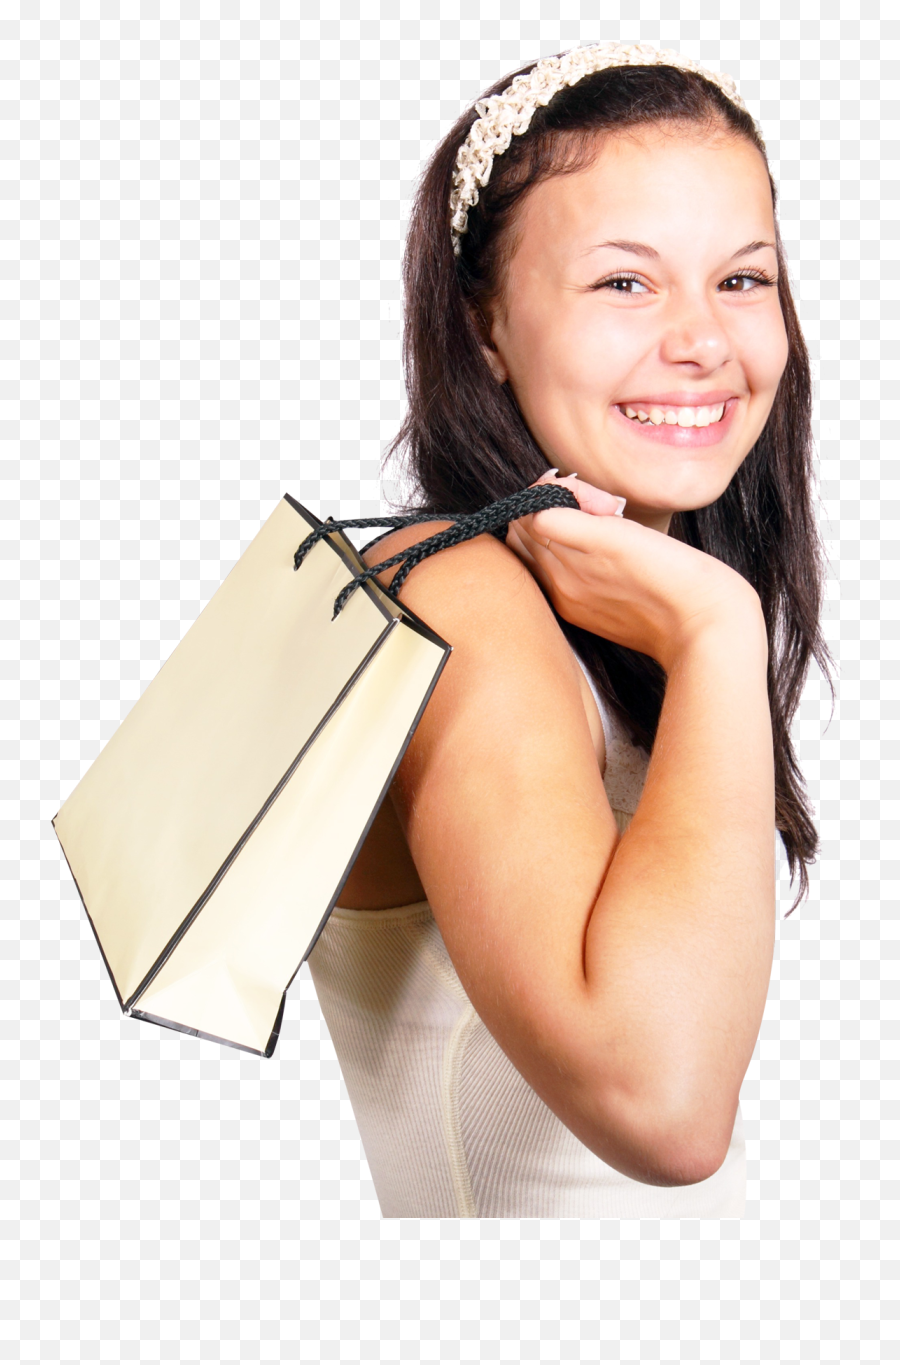 Happy Smiling Woman Hold Shopping Bag Png Image - Pngpix Shopping Girl Bag Png,Shopping Bags Png